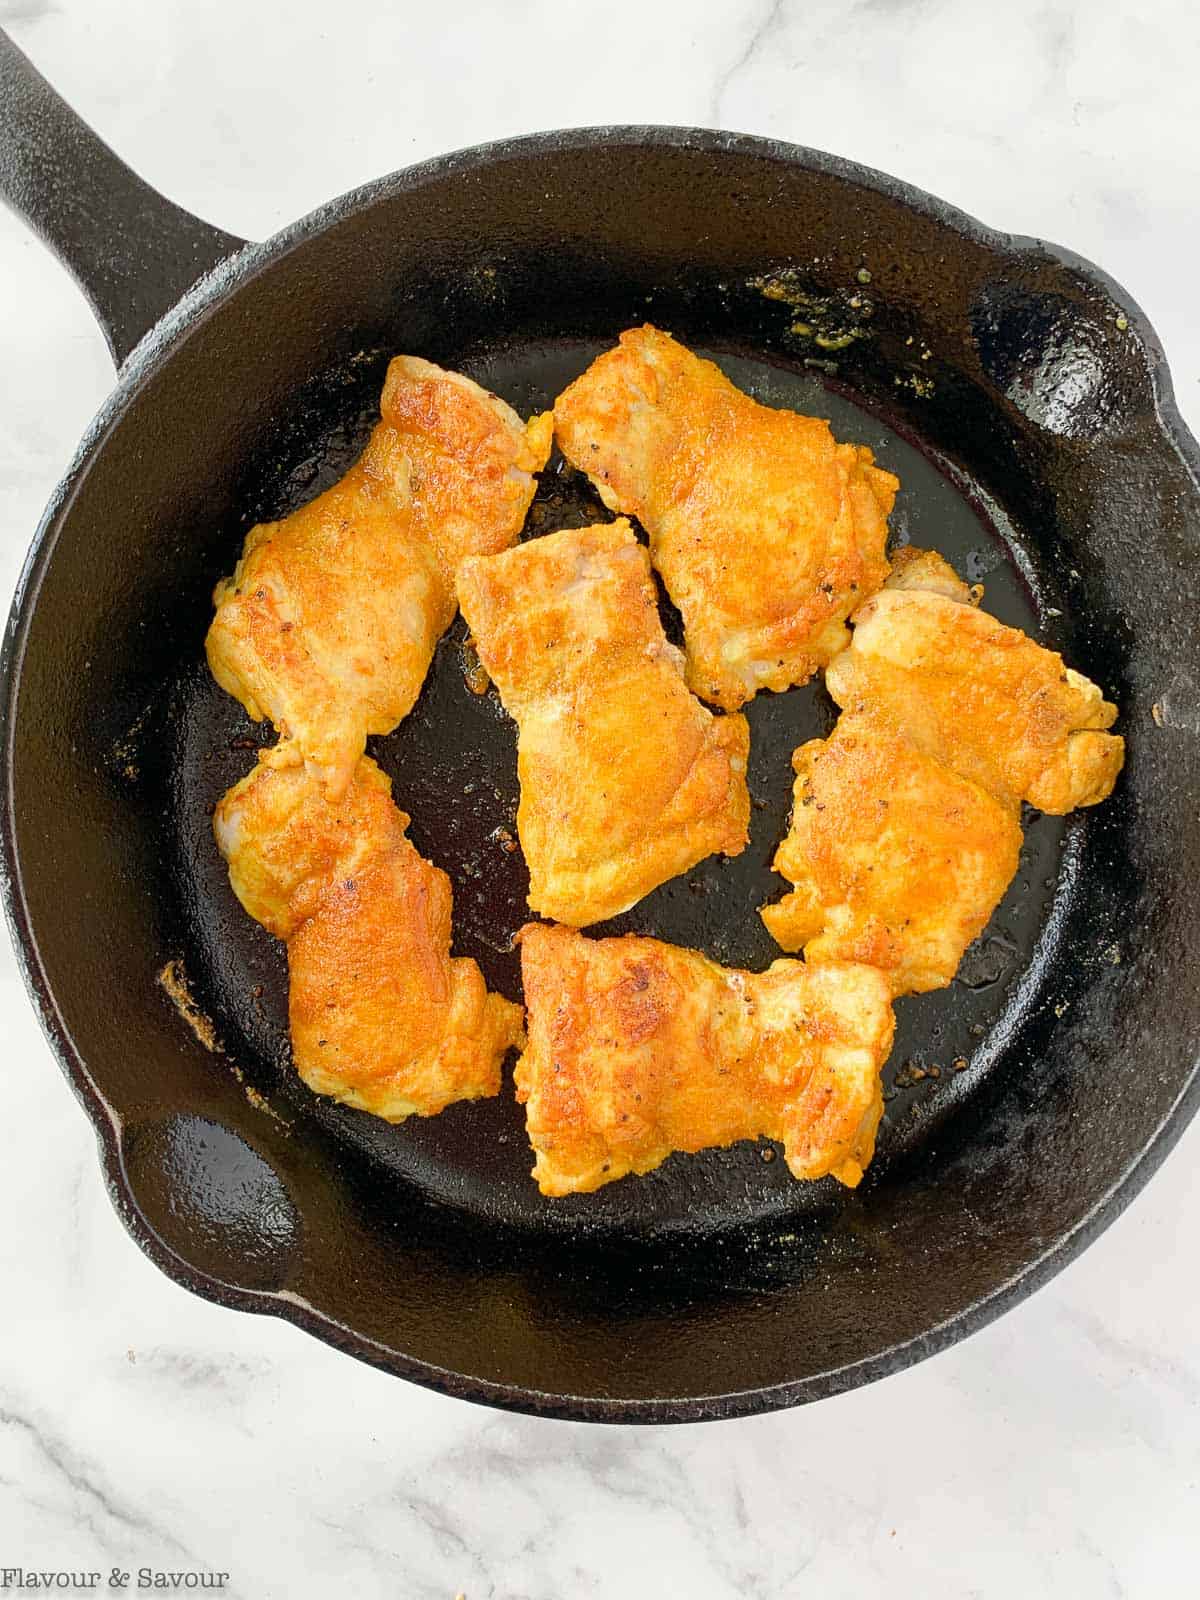 searing chicken thighs in skillet.